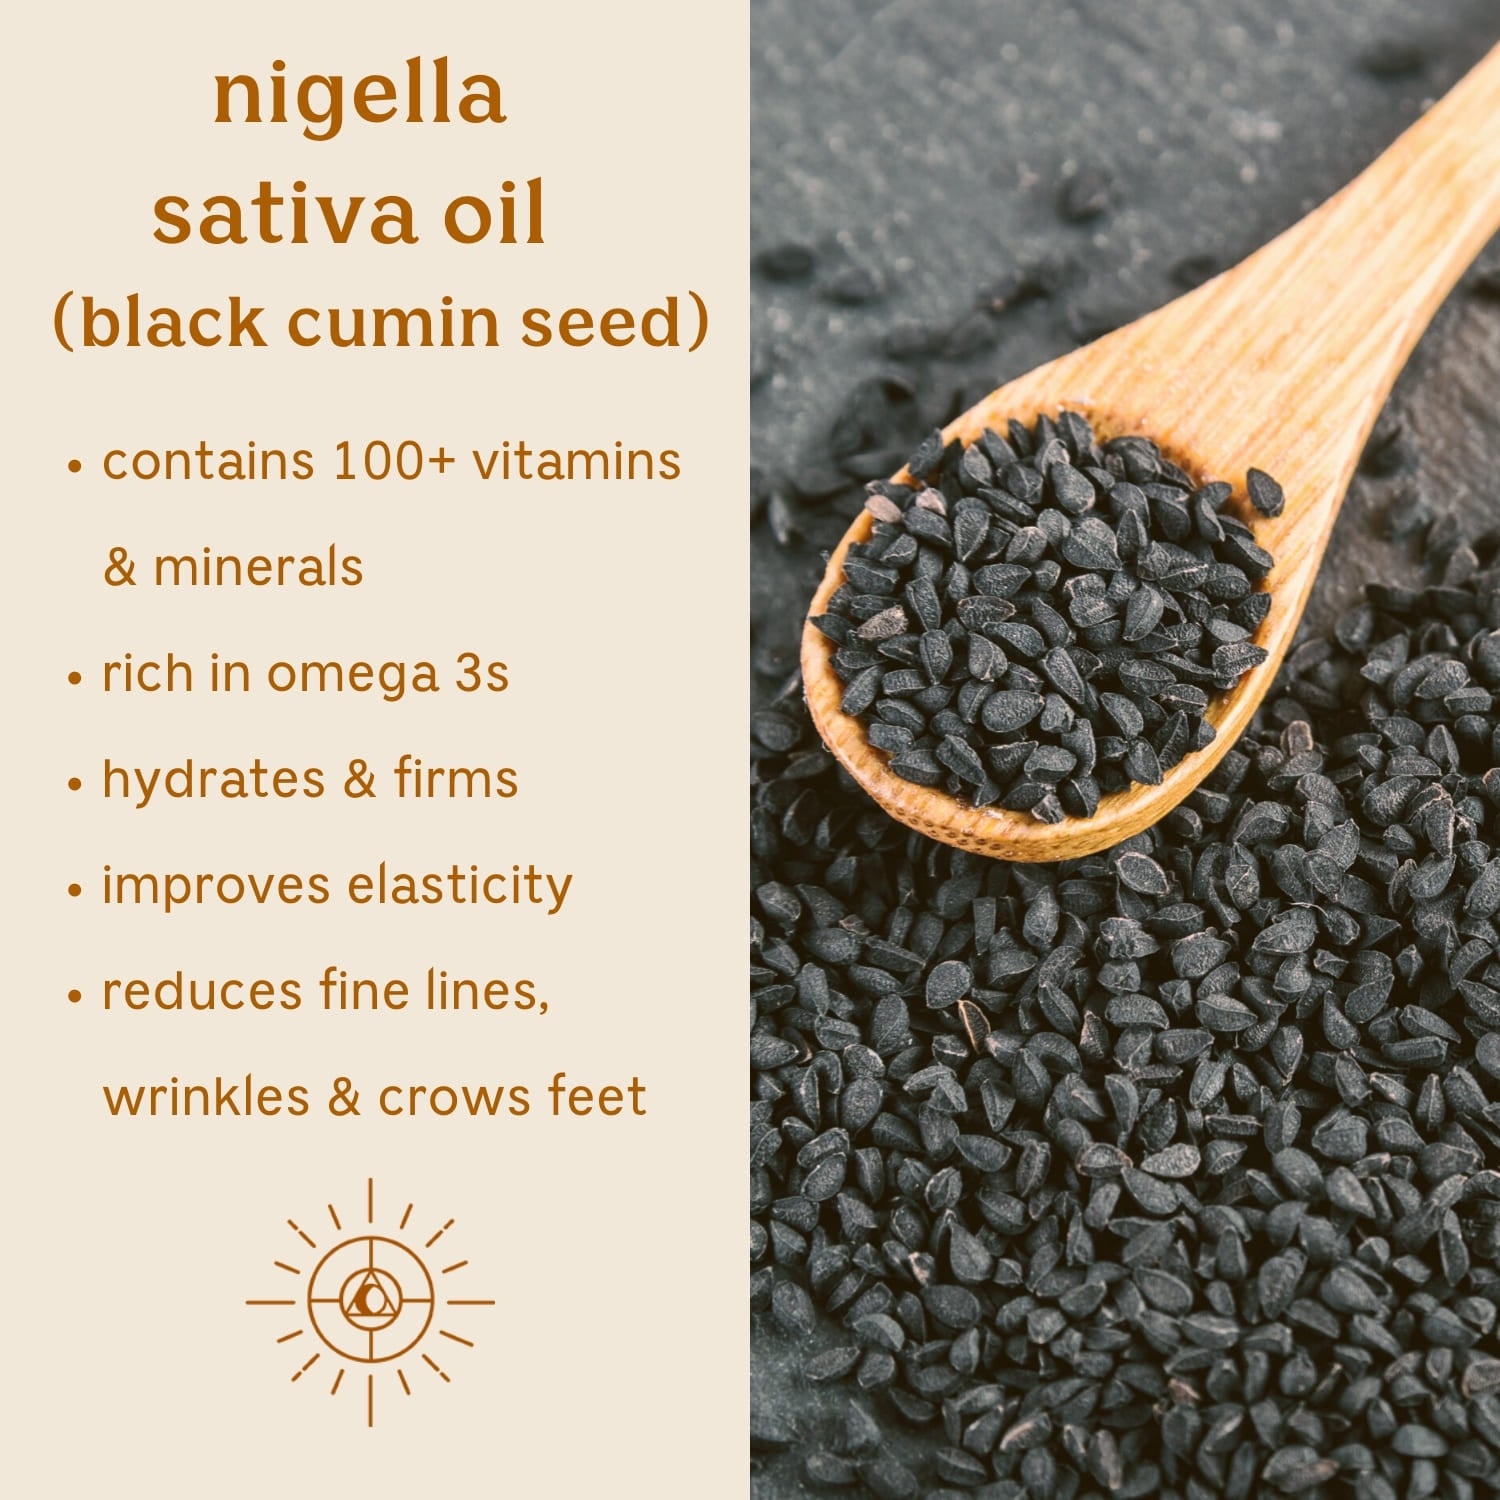 Solluna's Feel Good Eye Cream key ingredient benefit description. Nigella, Sativa Oil (black cumin seed): Contains 100+ vitamins & minerals, Rich in omega 3s, Hydrates & firms, Improves elasticity, Reduces fine lines, wrinkles & crows feet